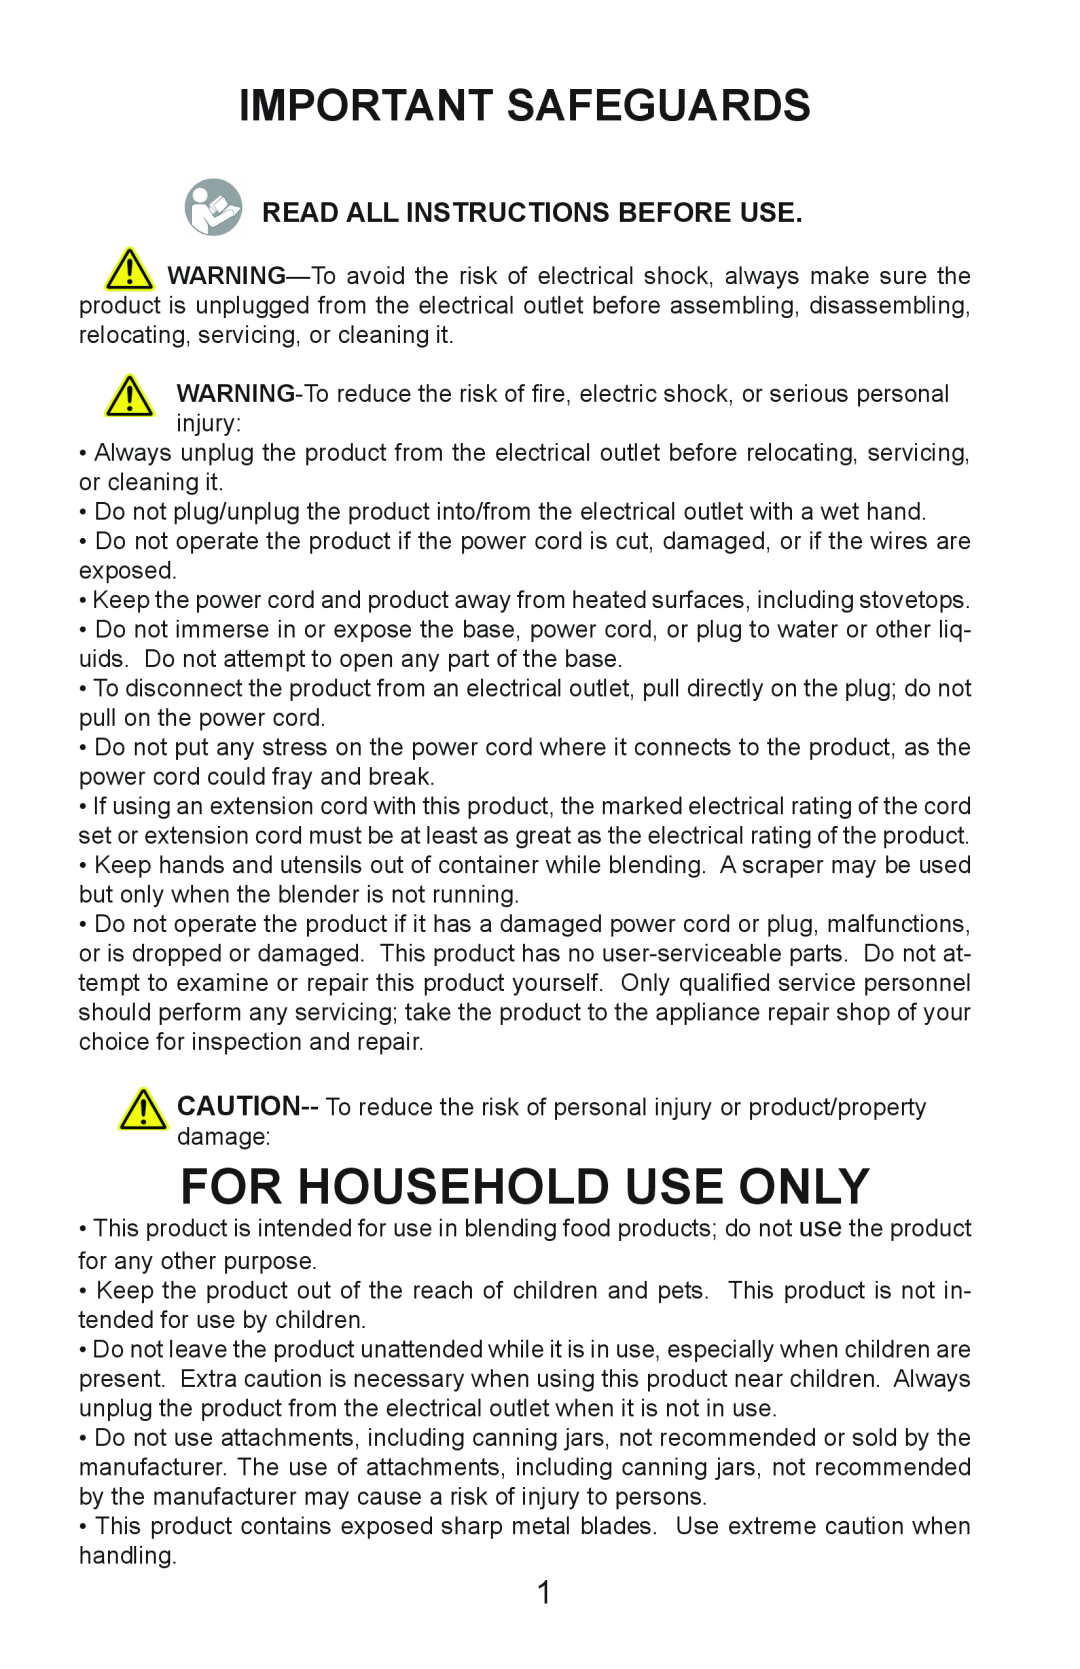 Continental Electric CE22131 user manual For Household Use Only, Important Safeguards, Read All Instructions Before Use 